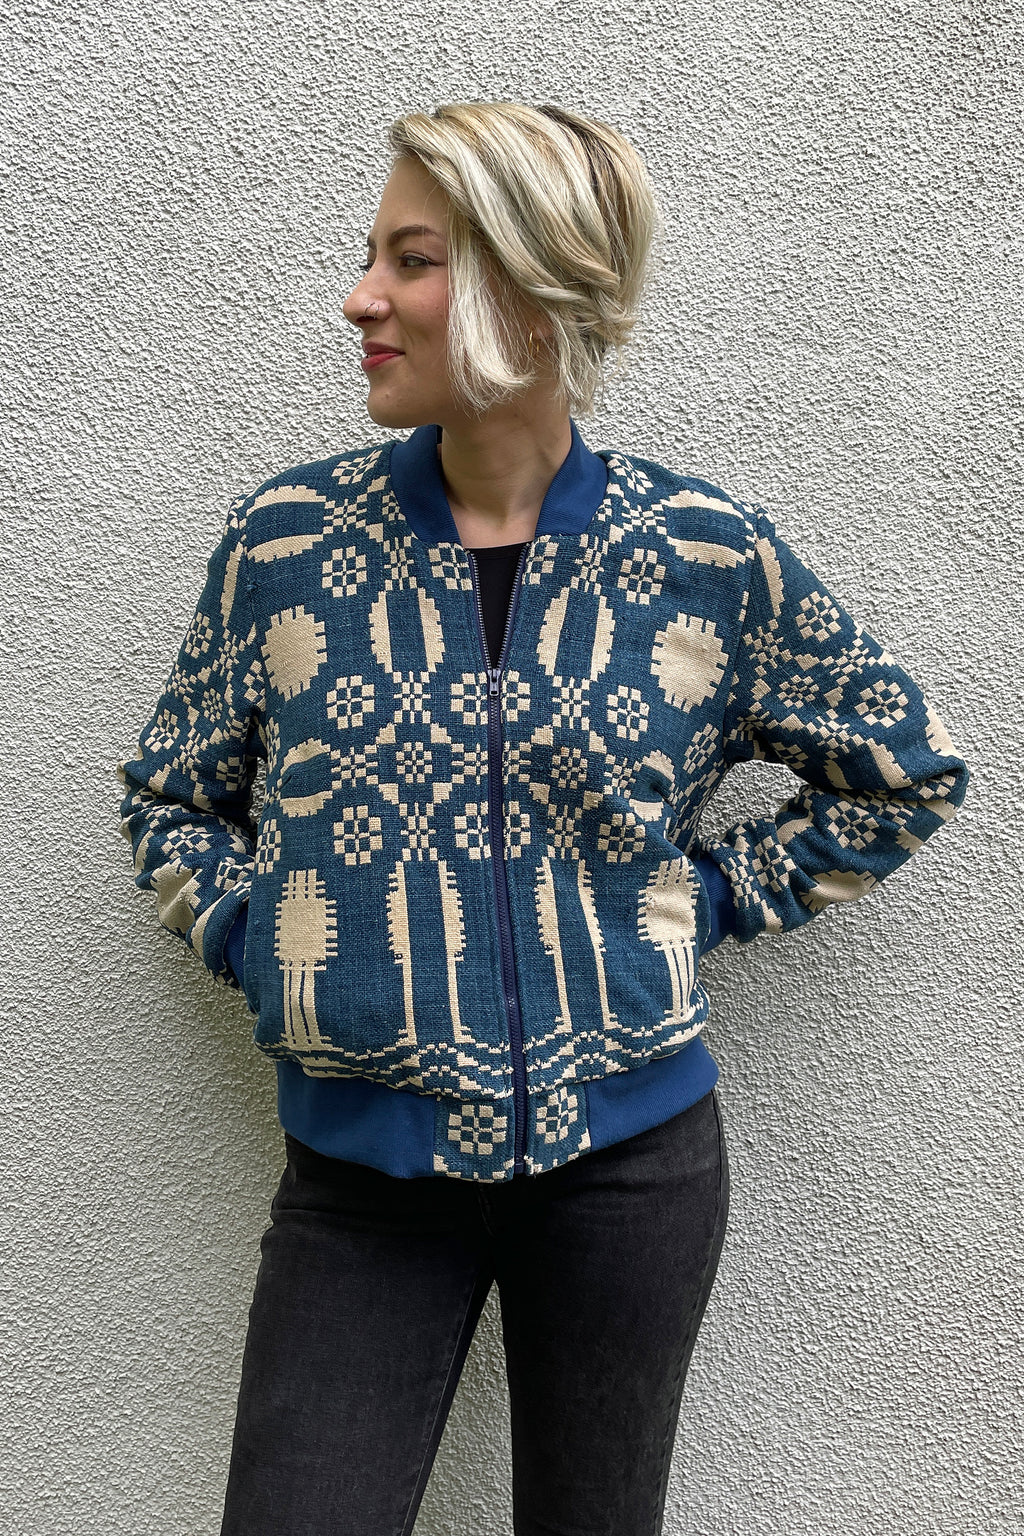 SAMPLE - Antique Woven Blue and Cream Coverlet Bomber Jacket, size Medium